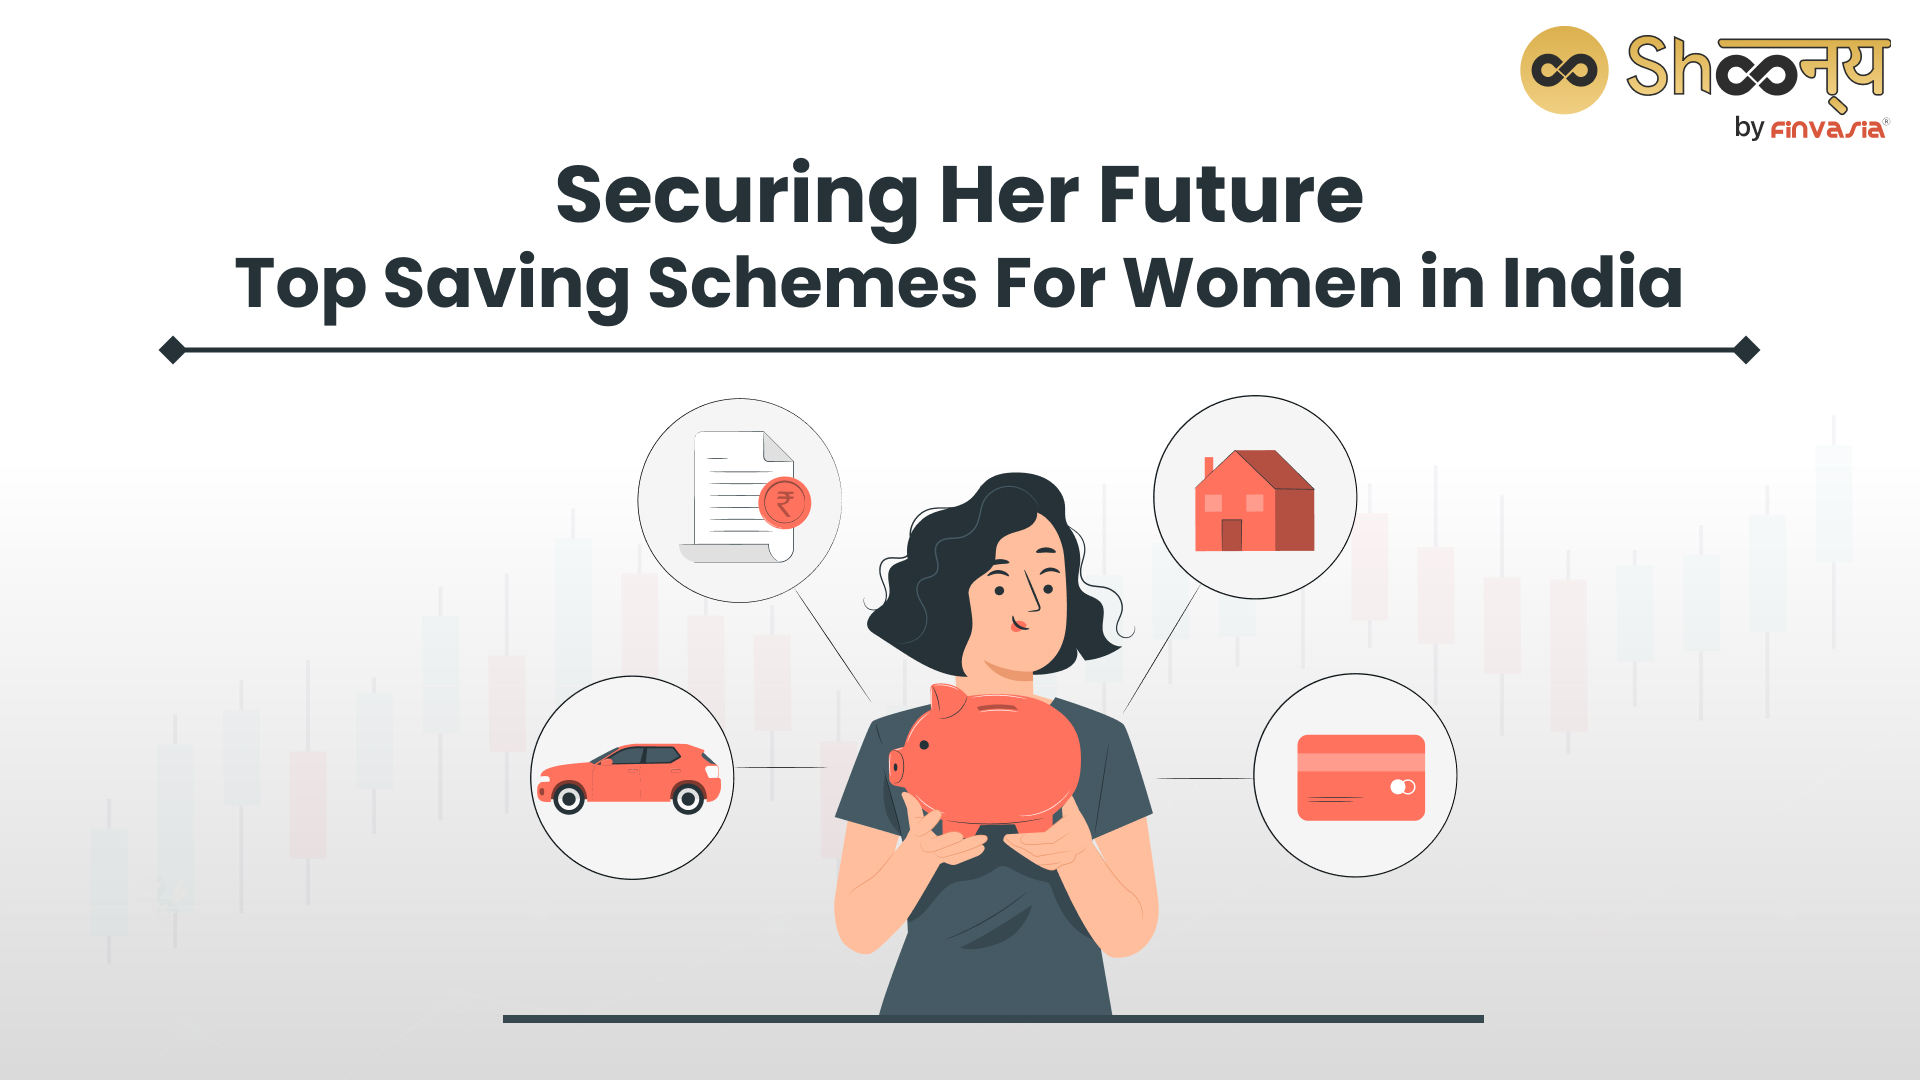 
  Key Saving Schemes for Women in India You Should Know About